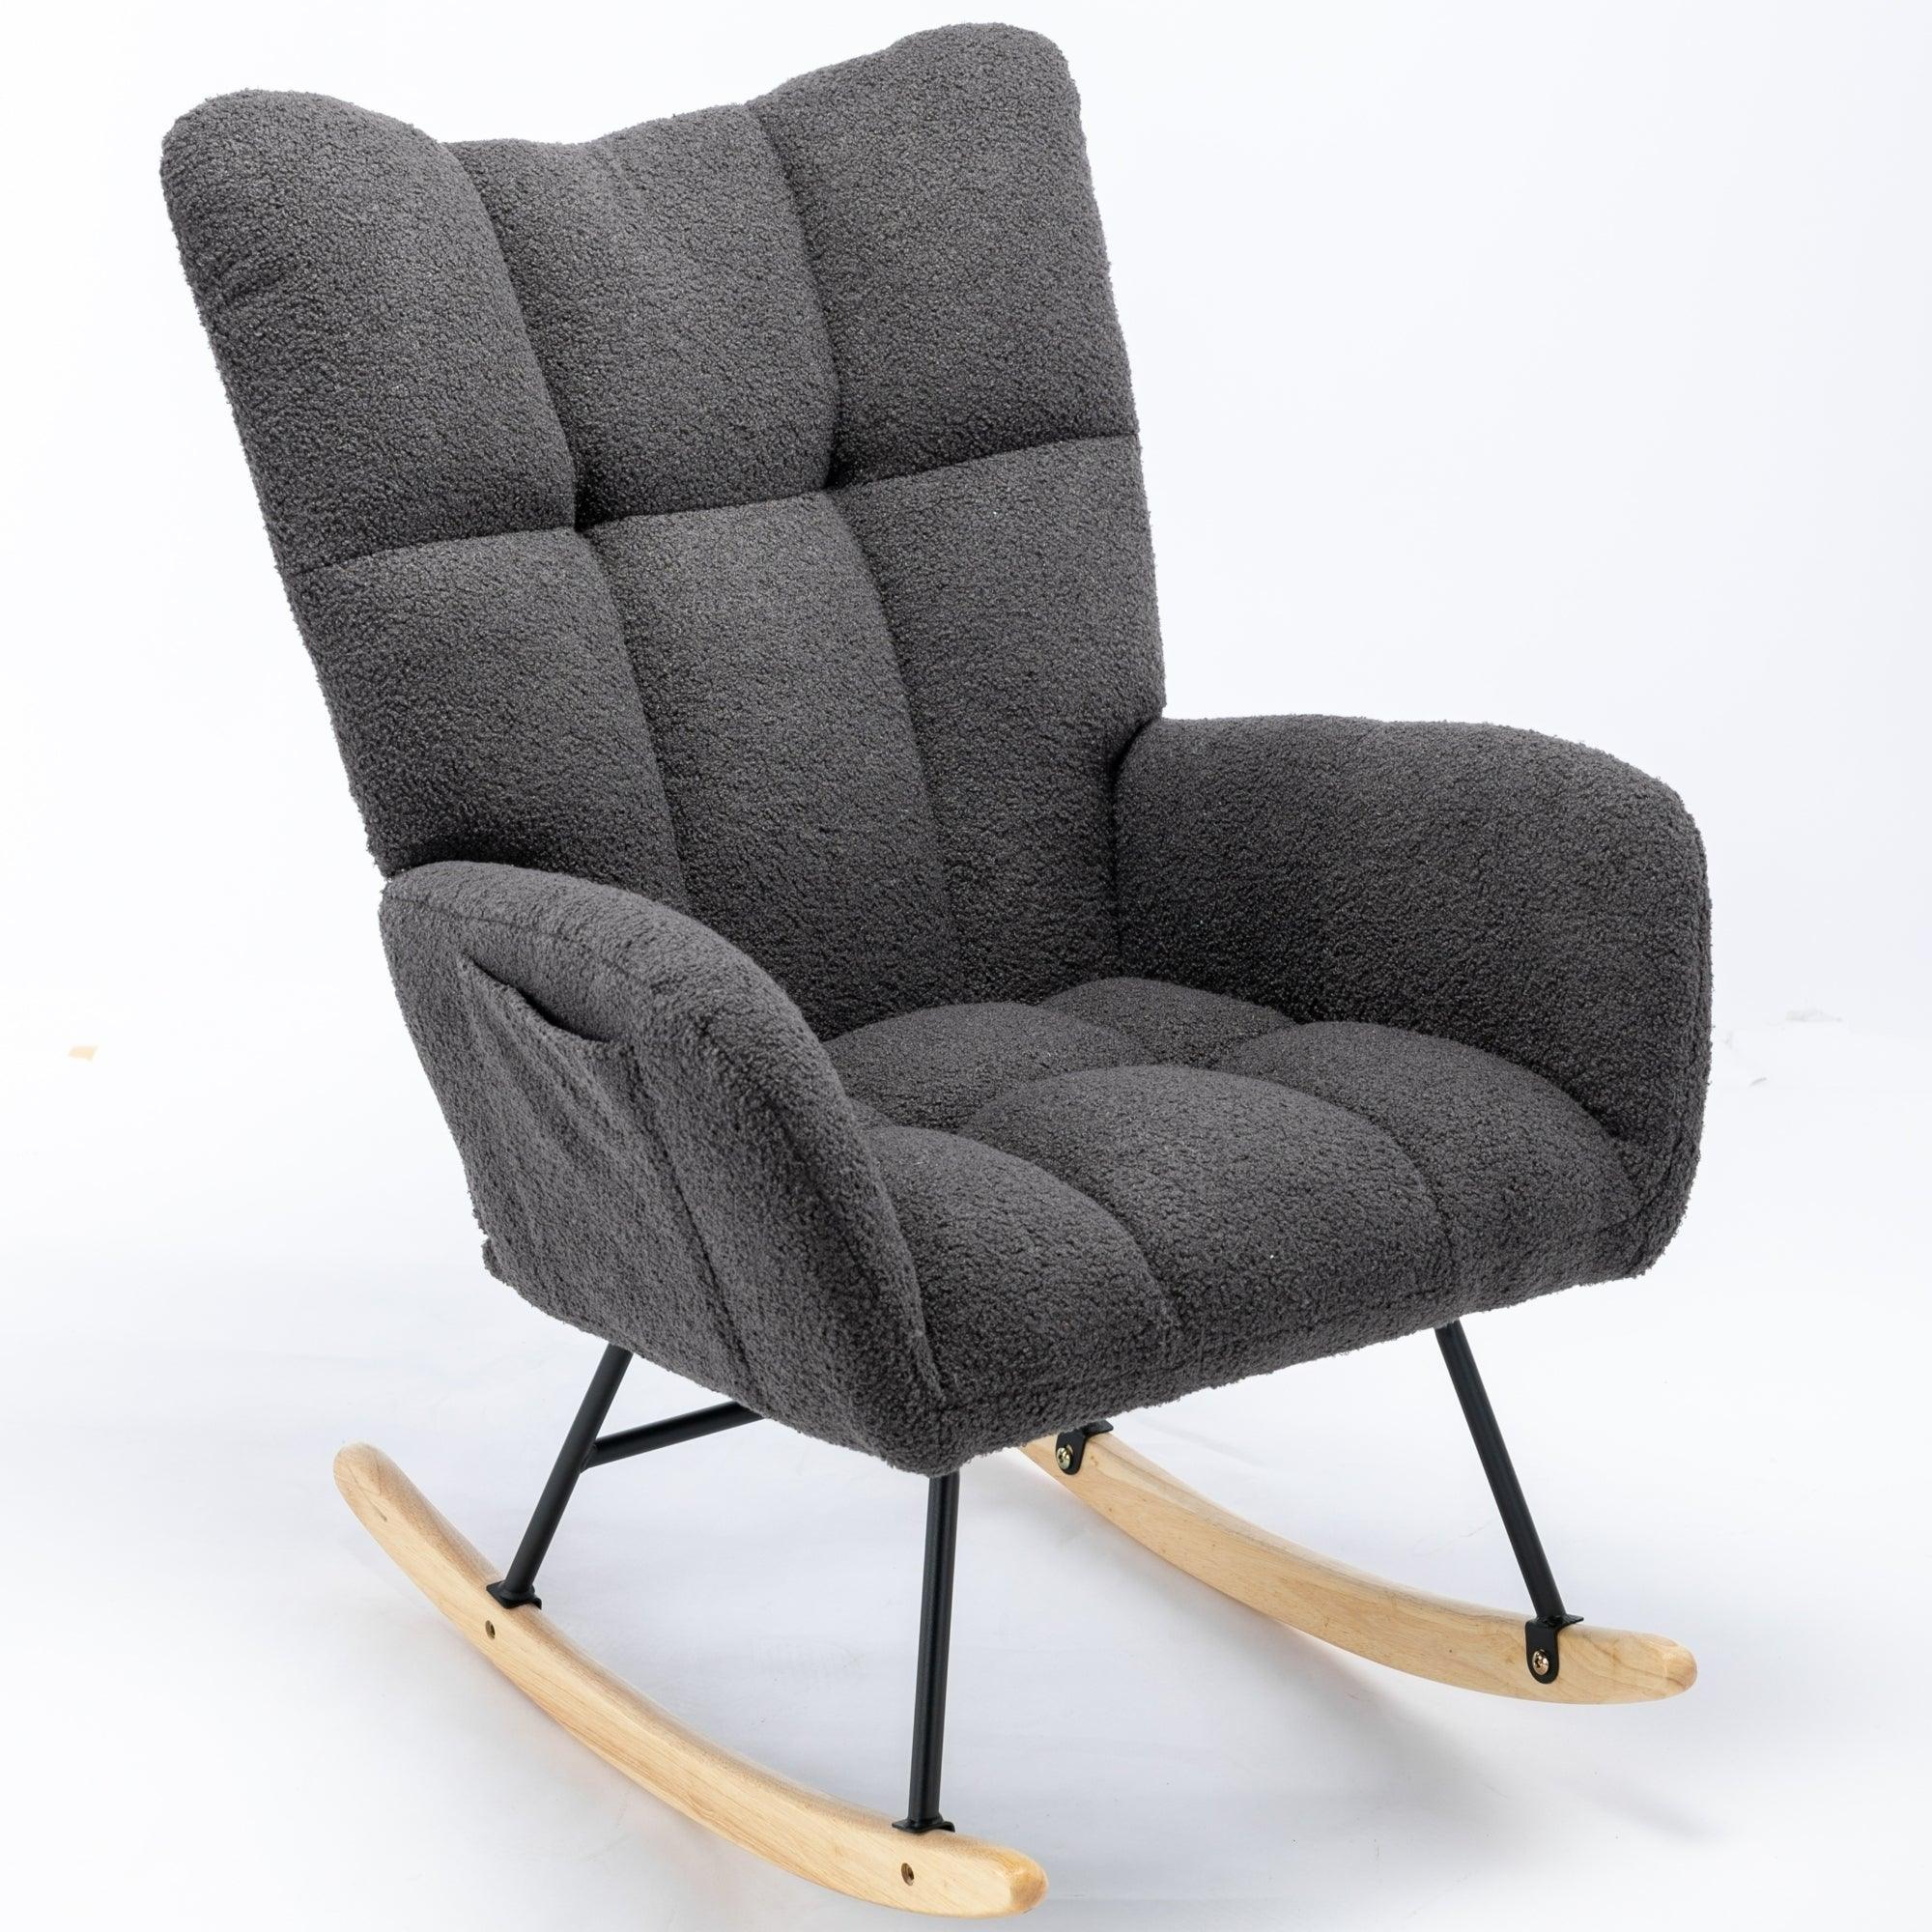 🆓🚛 Rocking Chair, Soft Teddy Velvet Fabric Rocking Chair for Nursery, Comfy Wingback Glider Rocker With Safe Solid Wood Base for Living Room Bedroom Balcony (Gray)